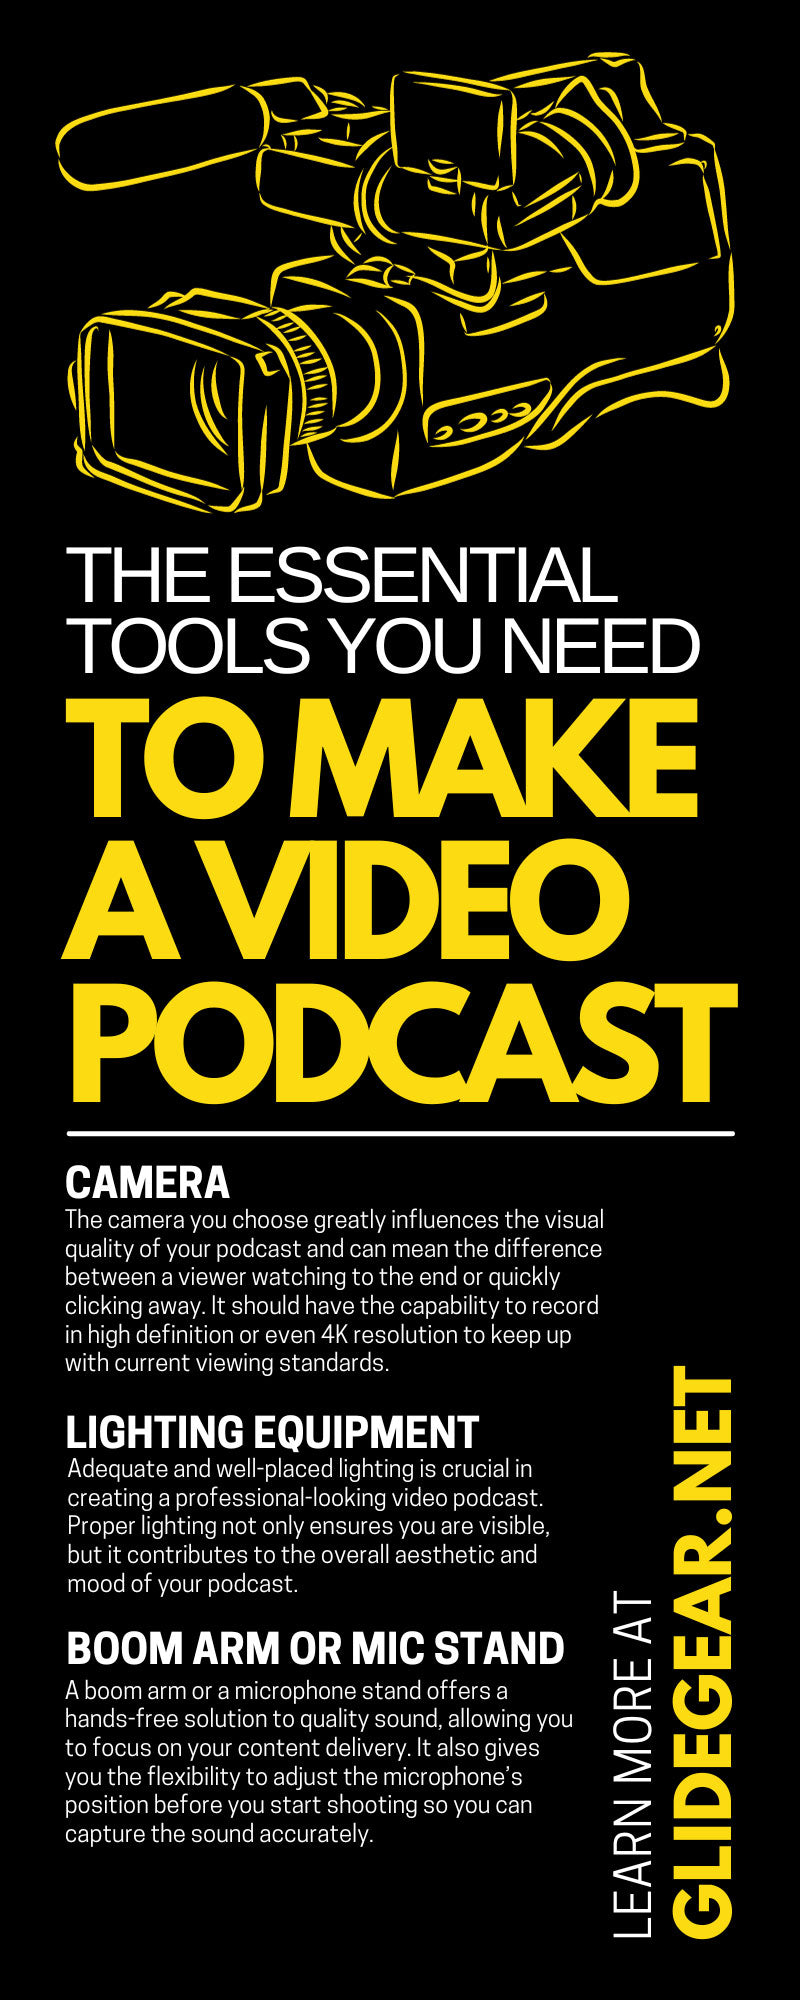 The Essential Tools You Need To Make a Video Podcast